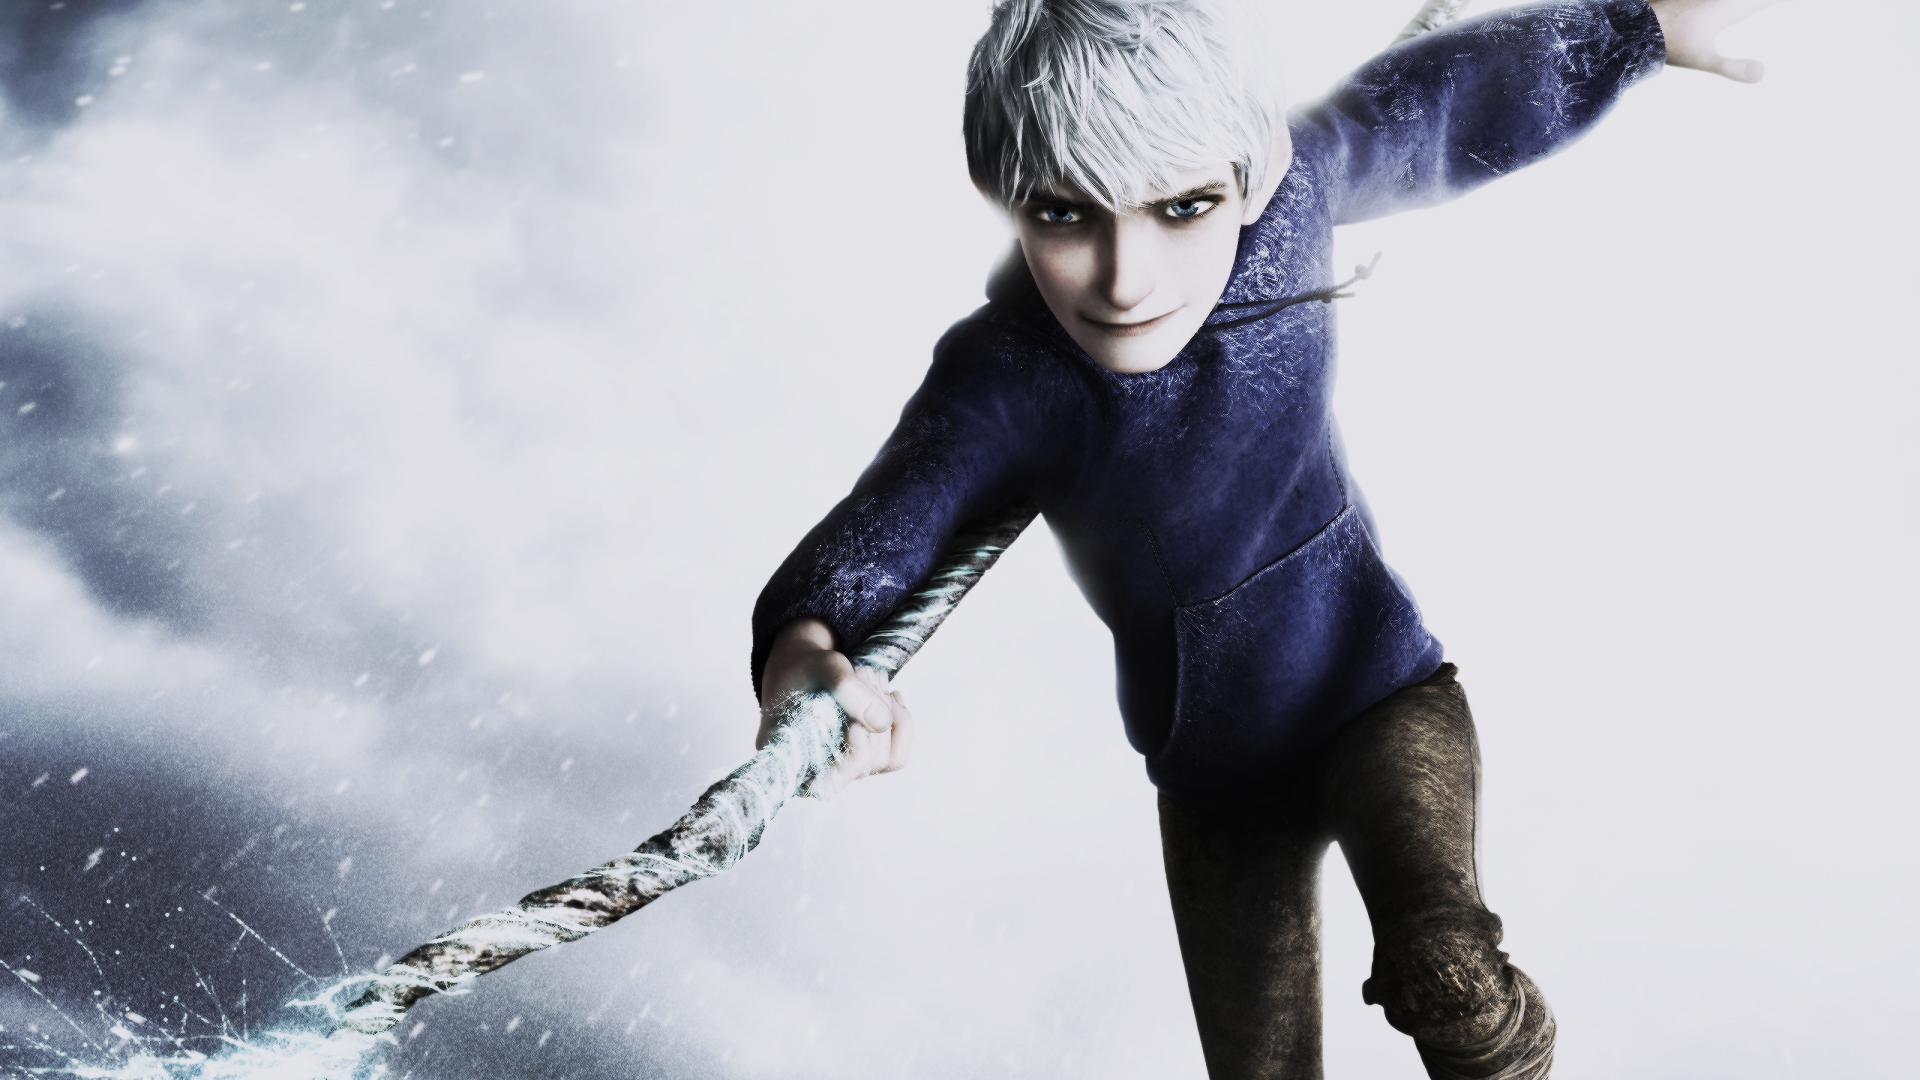 Jack Frost wallpaper by chibi trash on